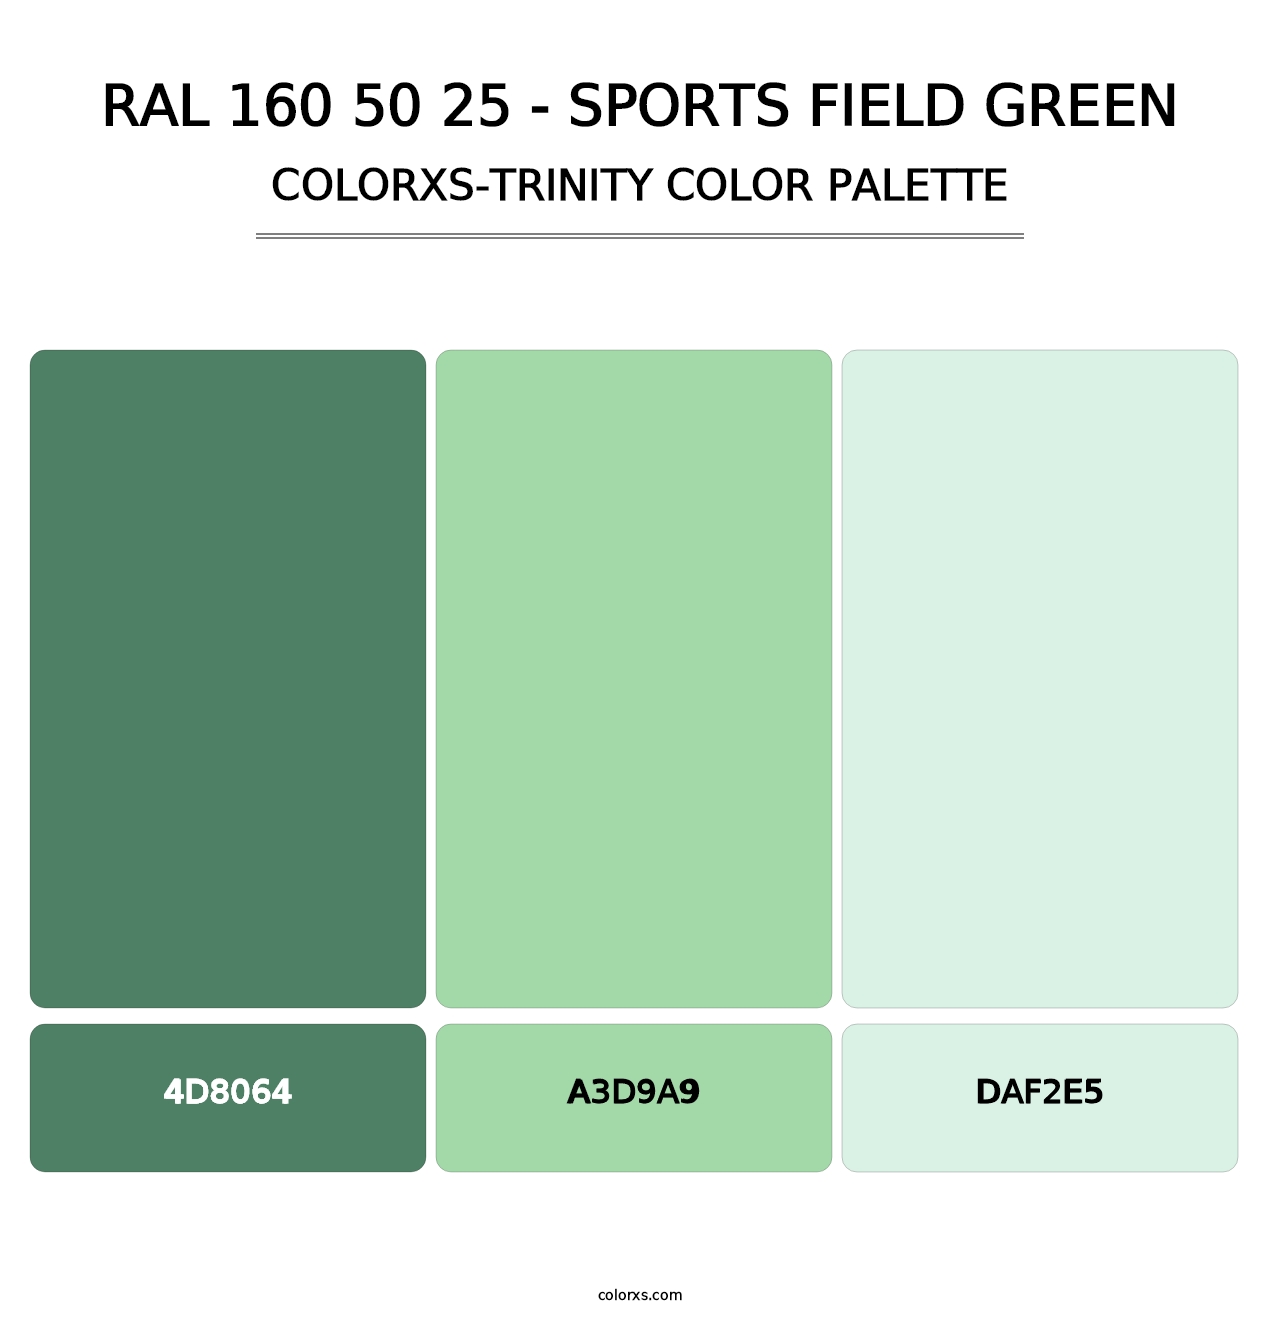 RAL 160 50 25 - Sports Field Green - Colorxs Trinity Palette